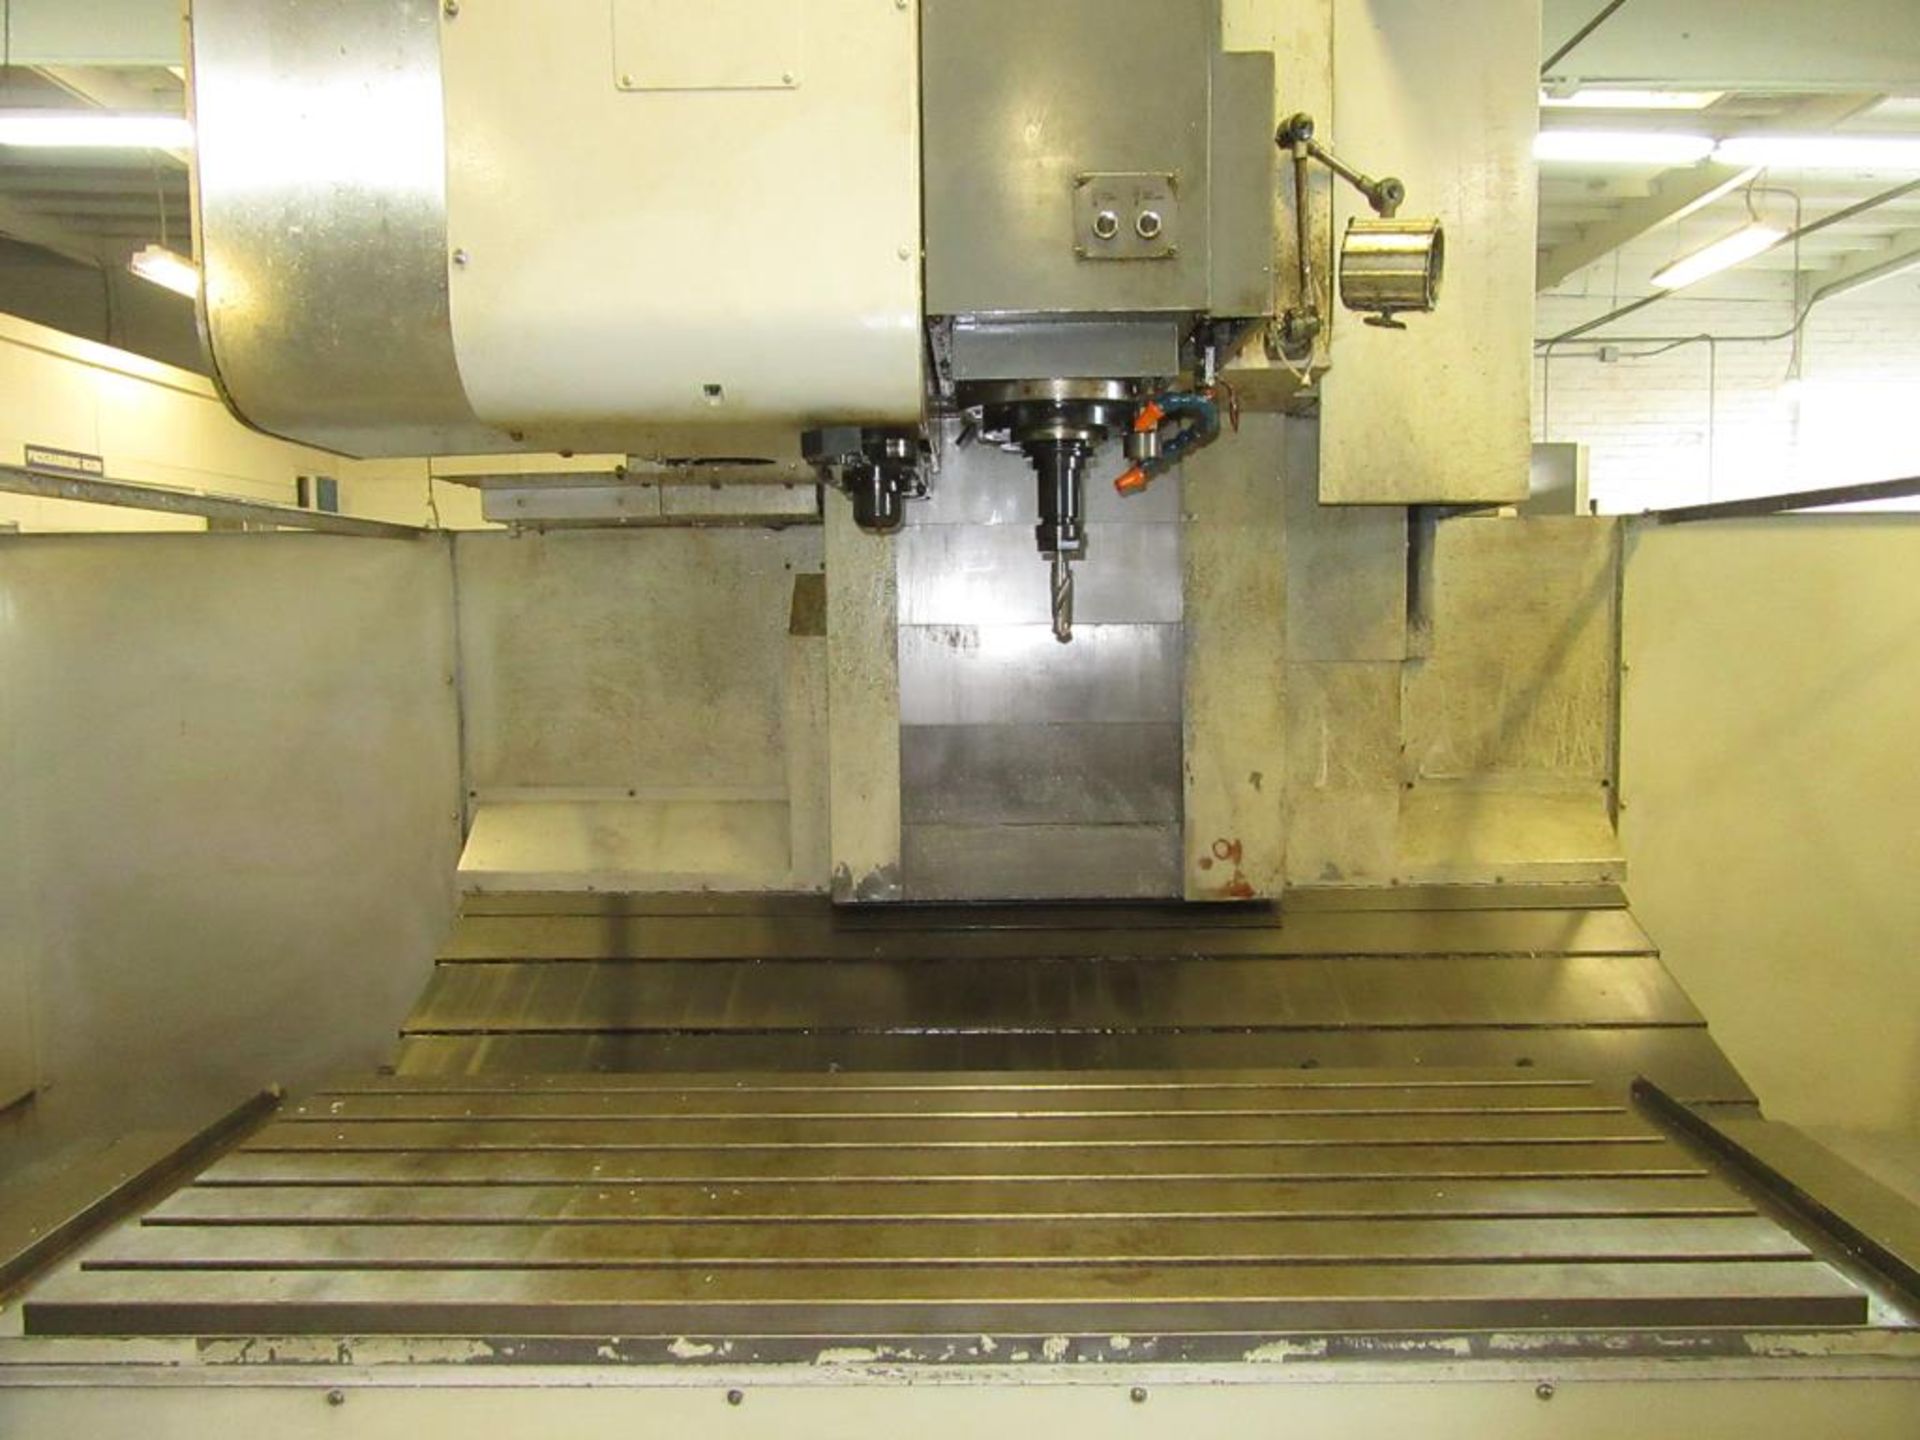 Mori Seiki MV-65/50 1992 - CNC Vertical Machining Center with MF-M4 3-Axis Control Panel, Table Size - Image 4 of 12